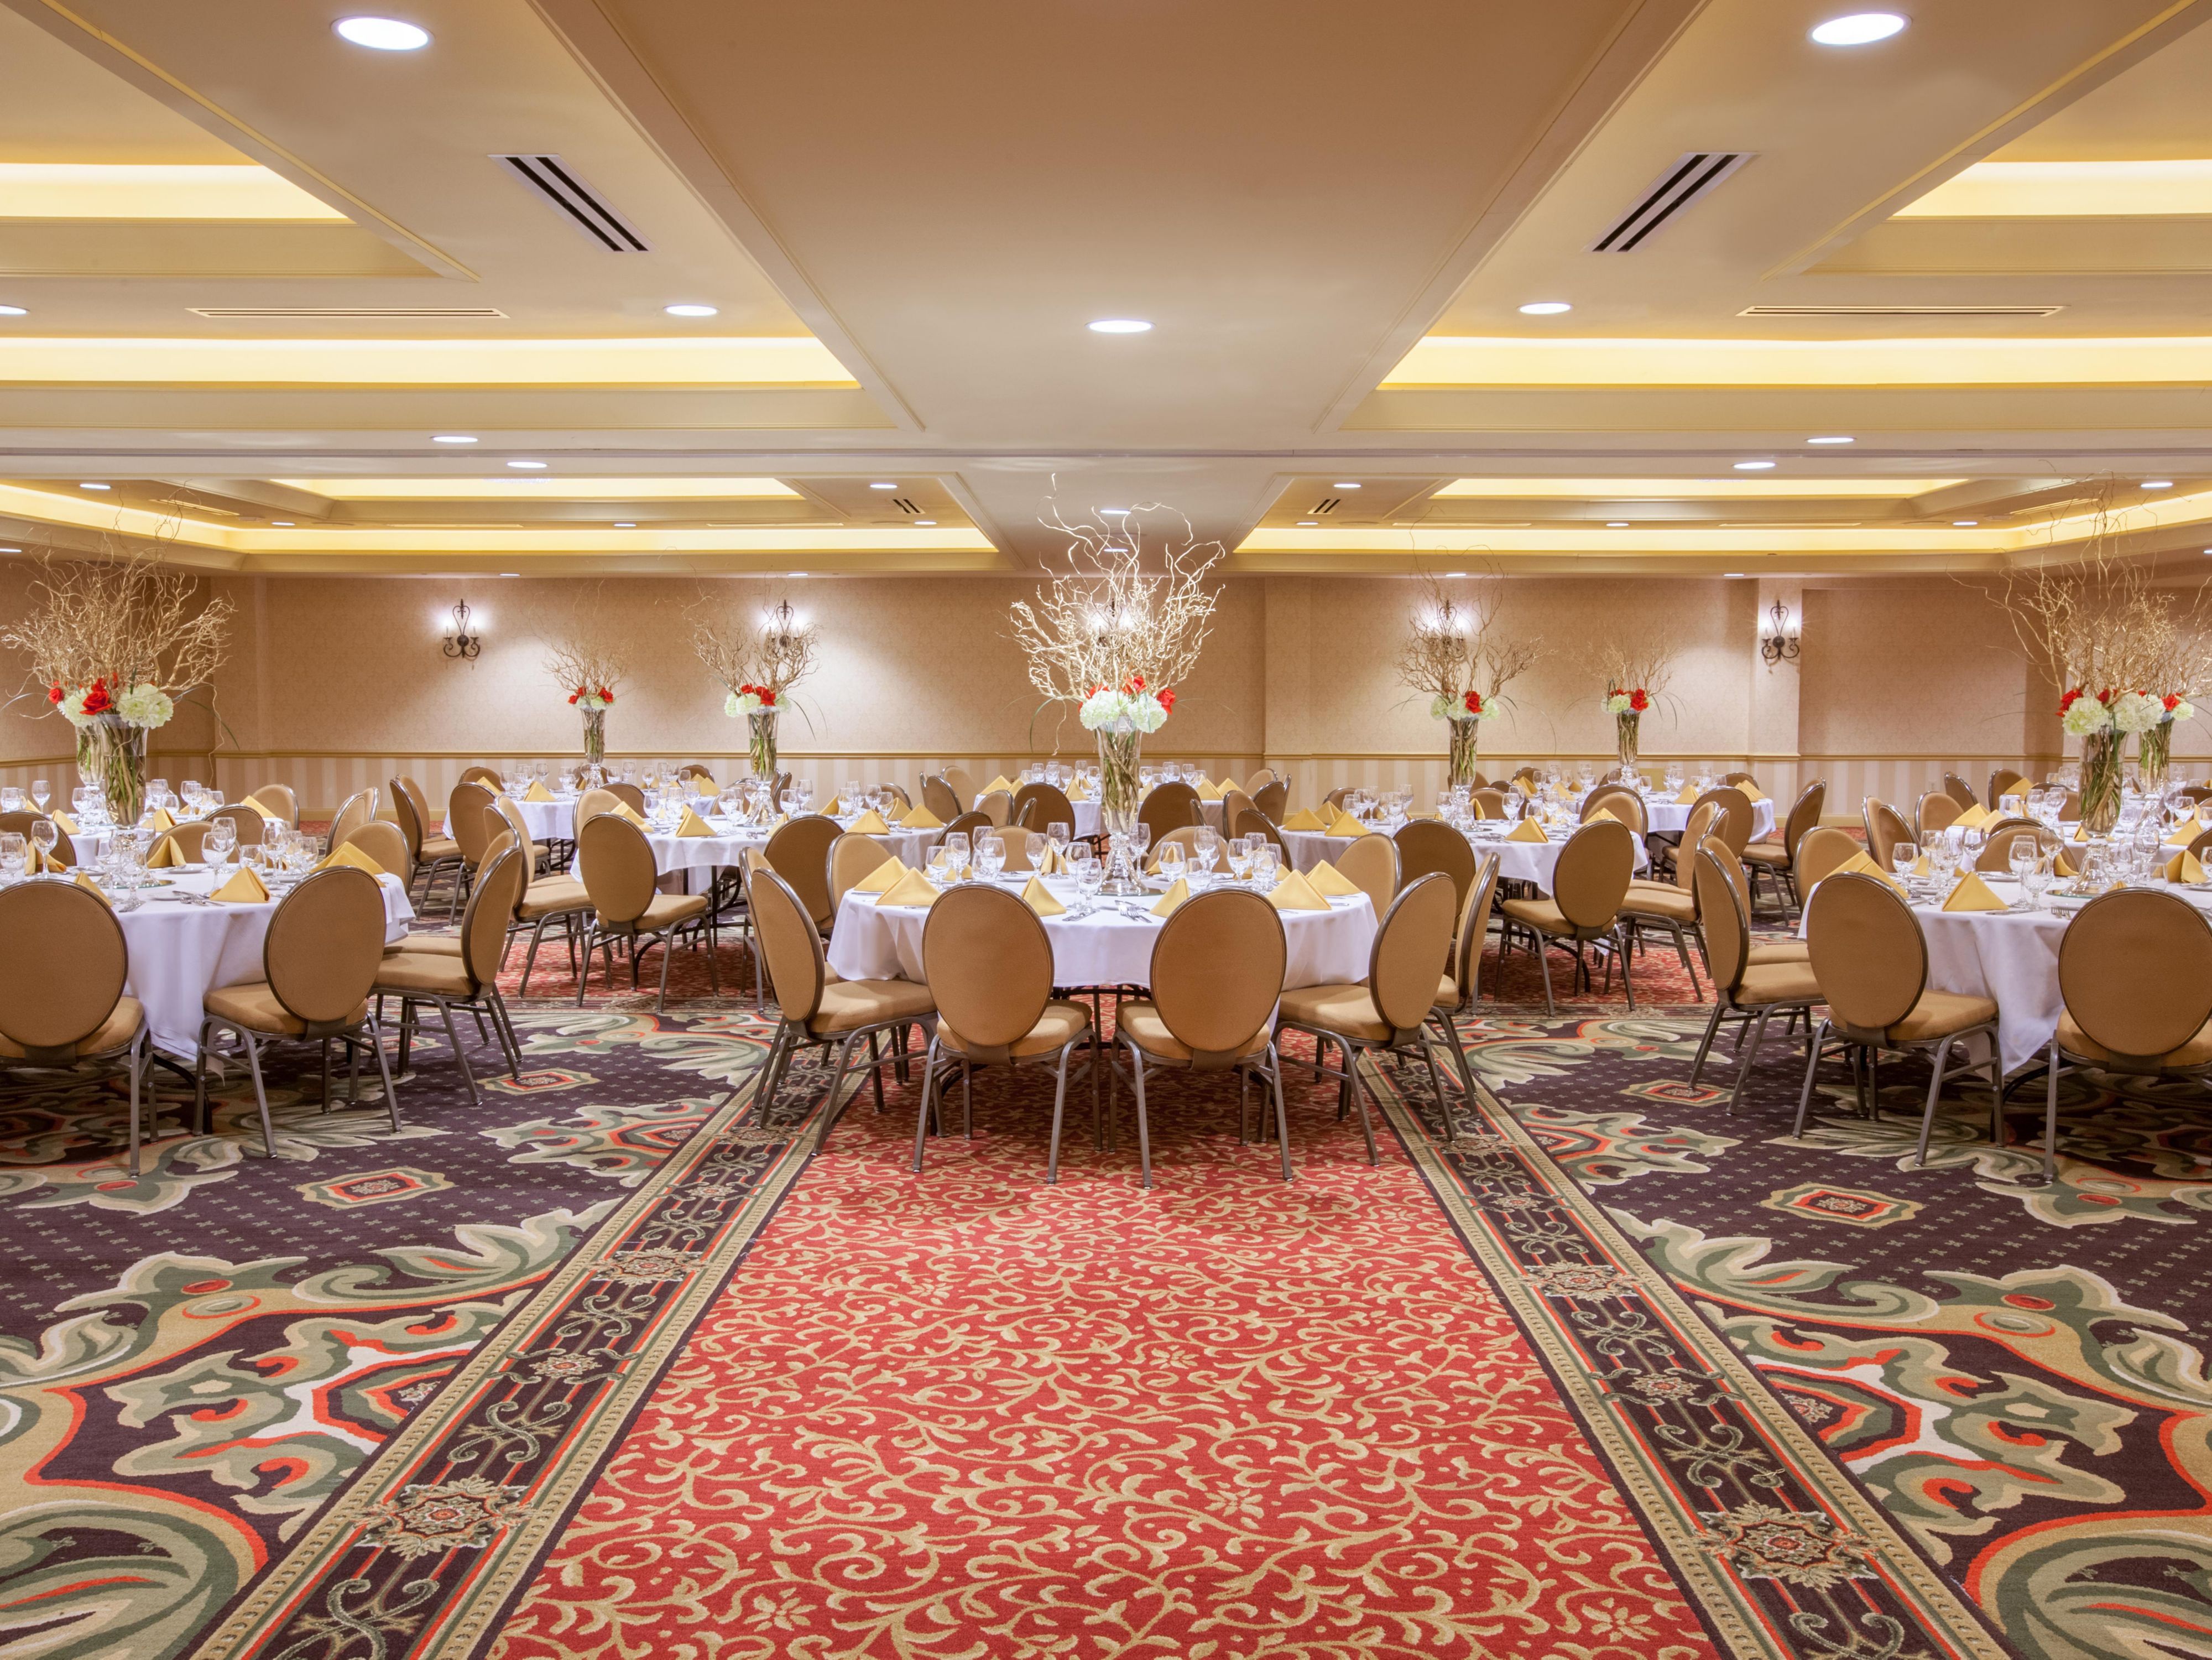 Wedding event space with decorated circular tables 